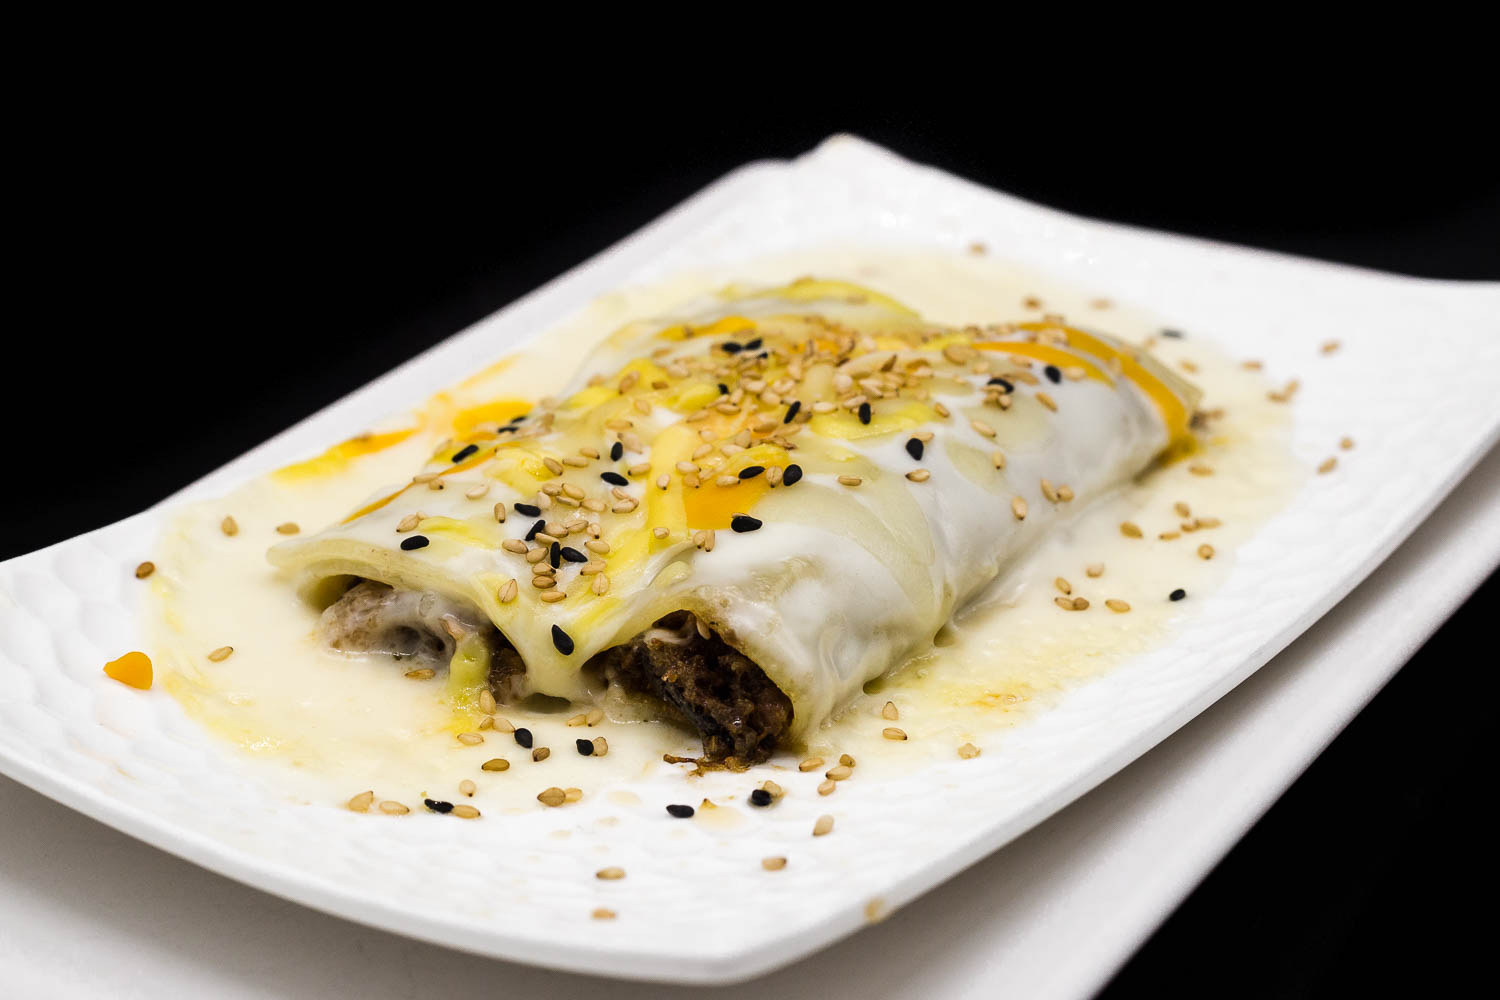 Pork cannelloni with cheese